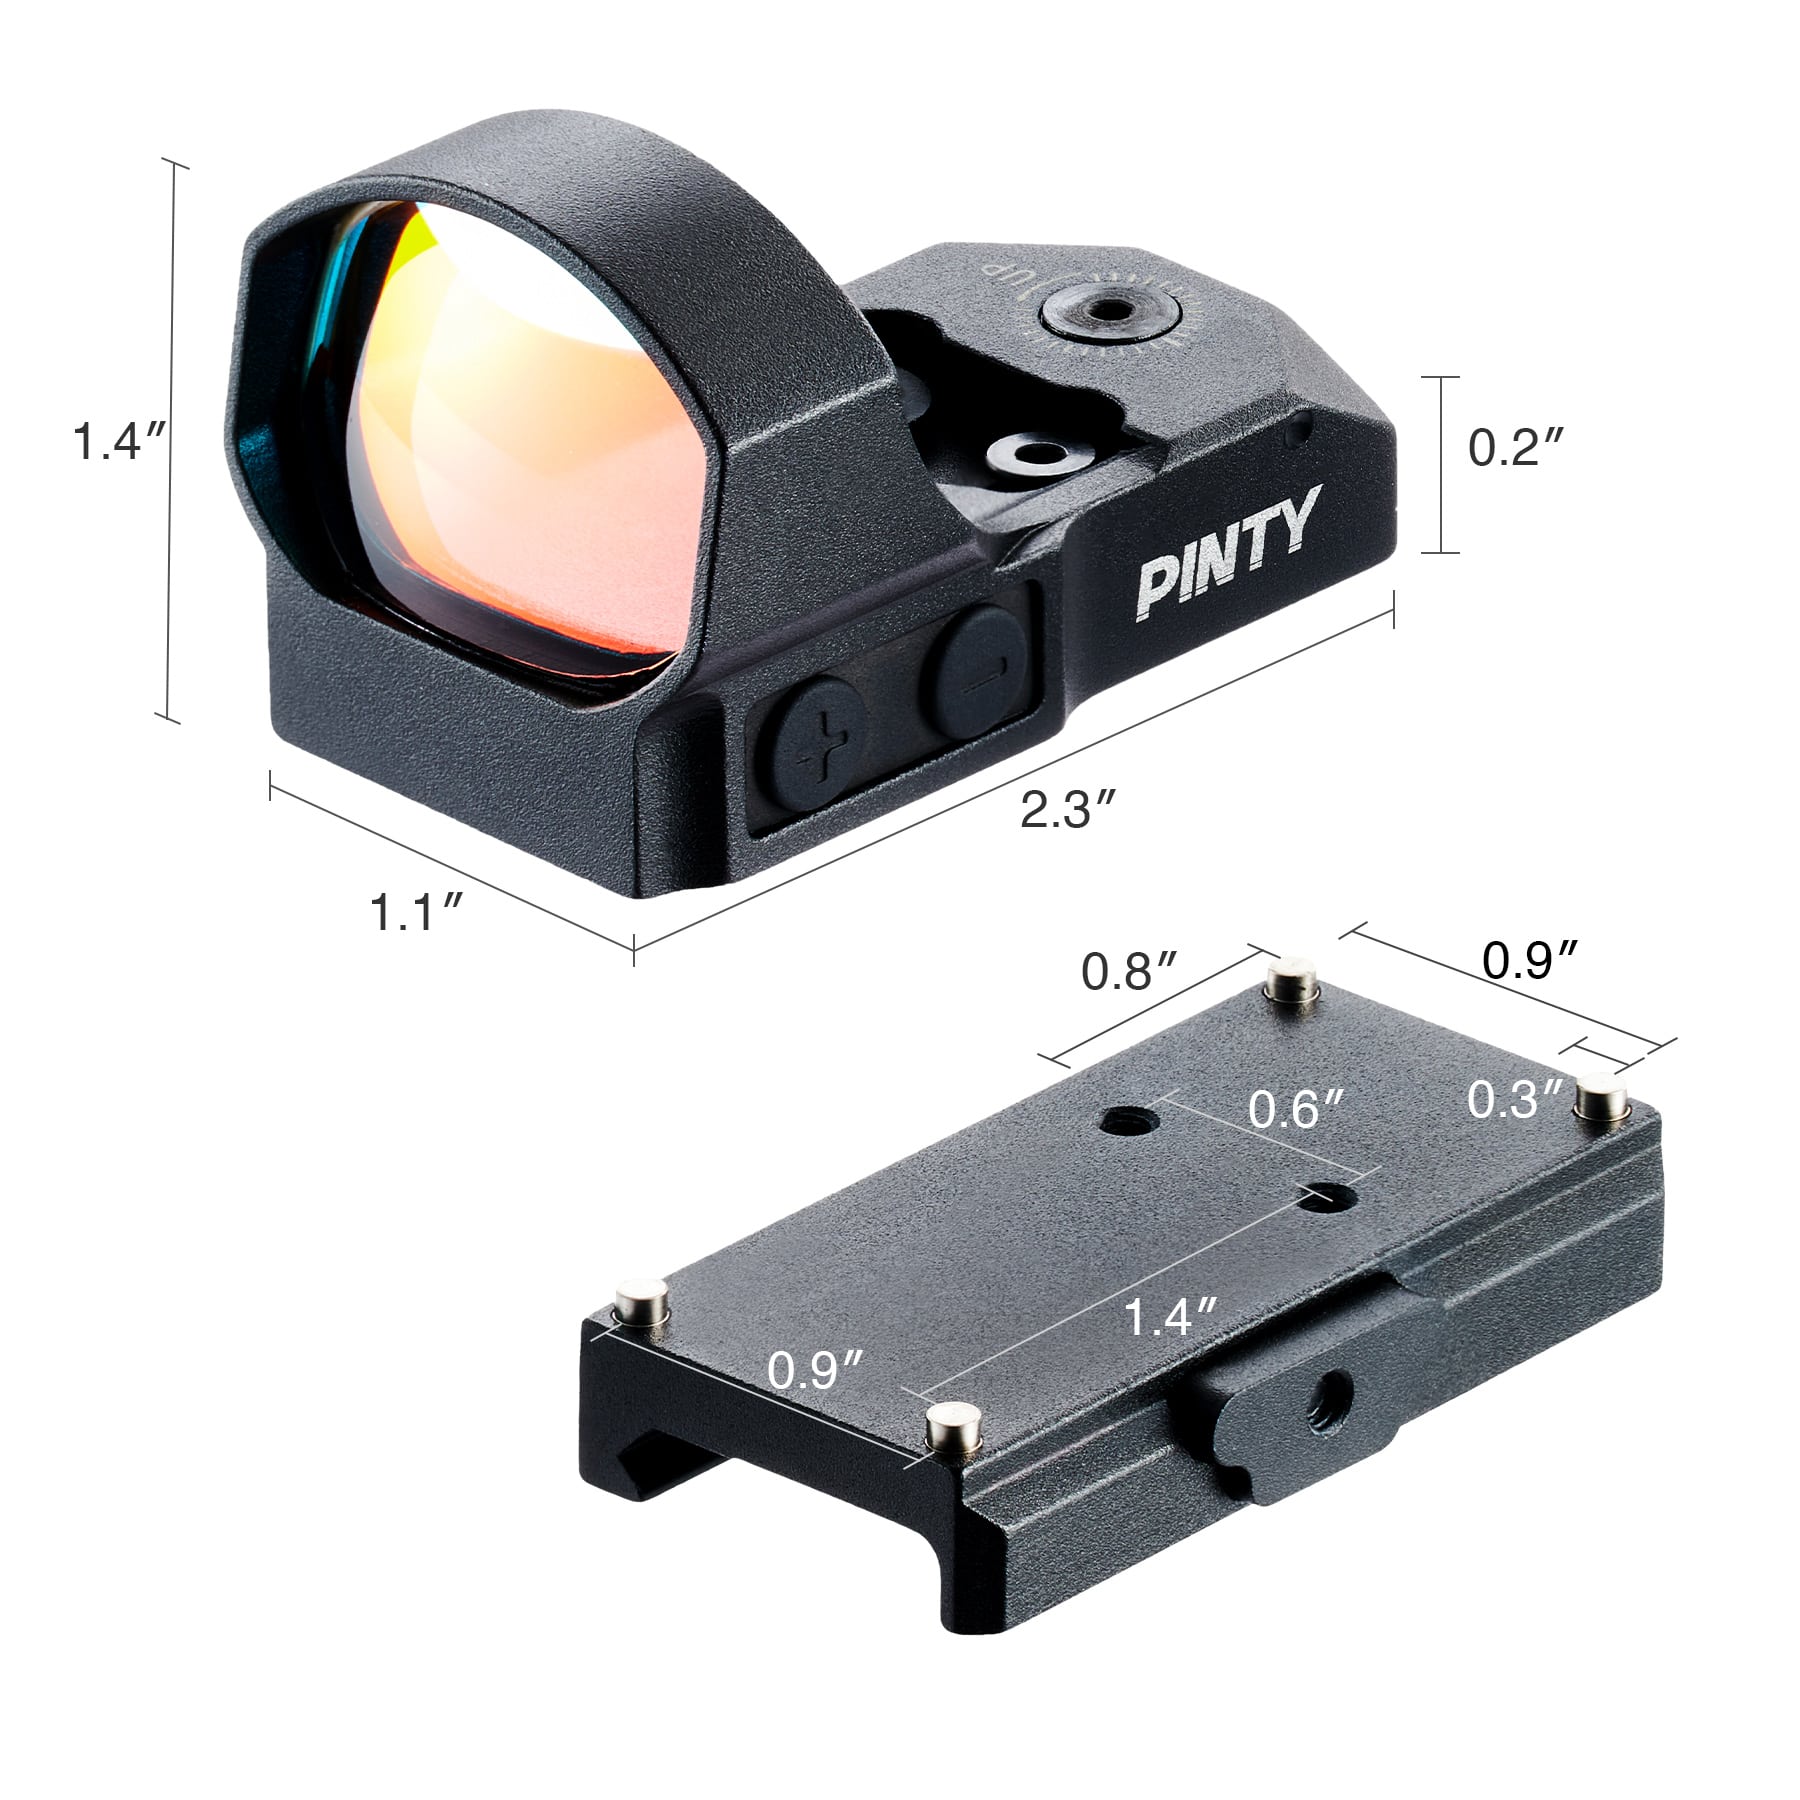 5-Brightness-Levels-for-Pistols-Rifles-BB-Pellet-Airsoft-Guns_-Battery-Included-best red dot for ar15 